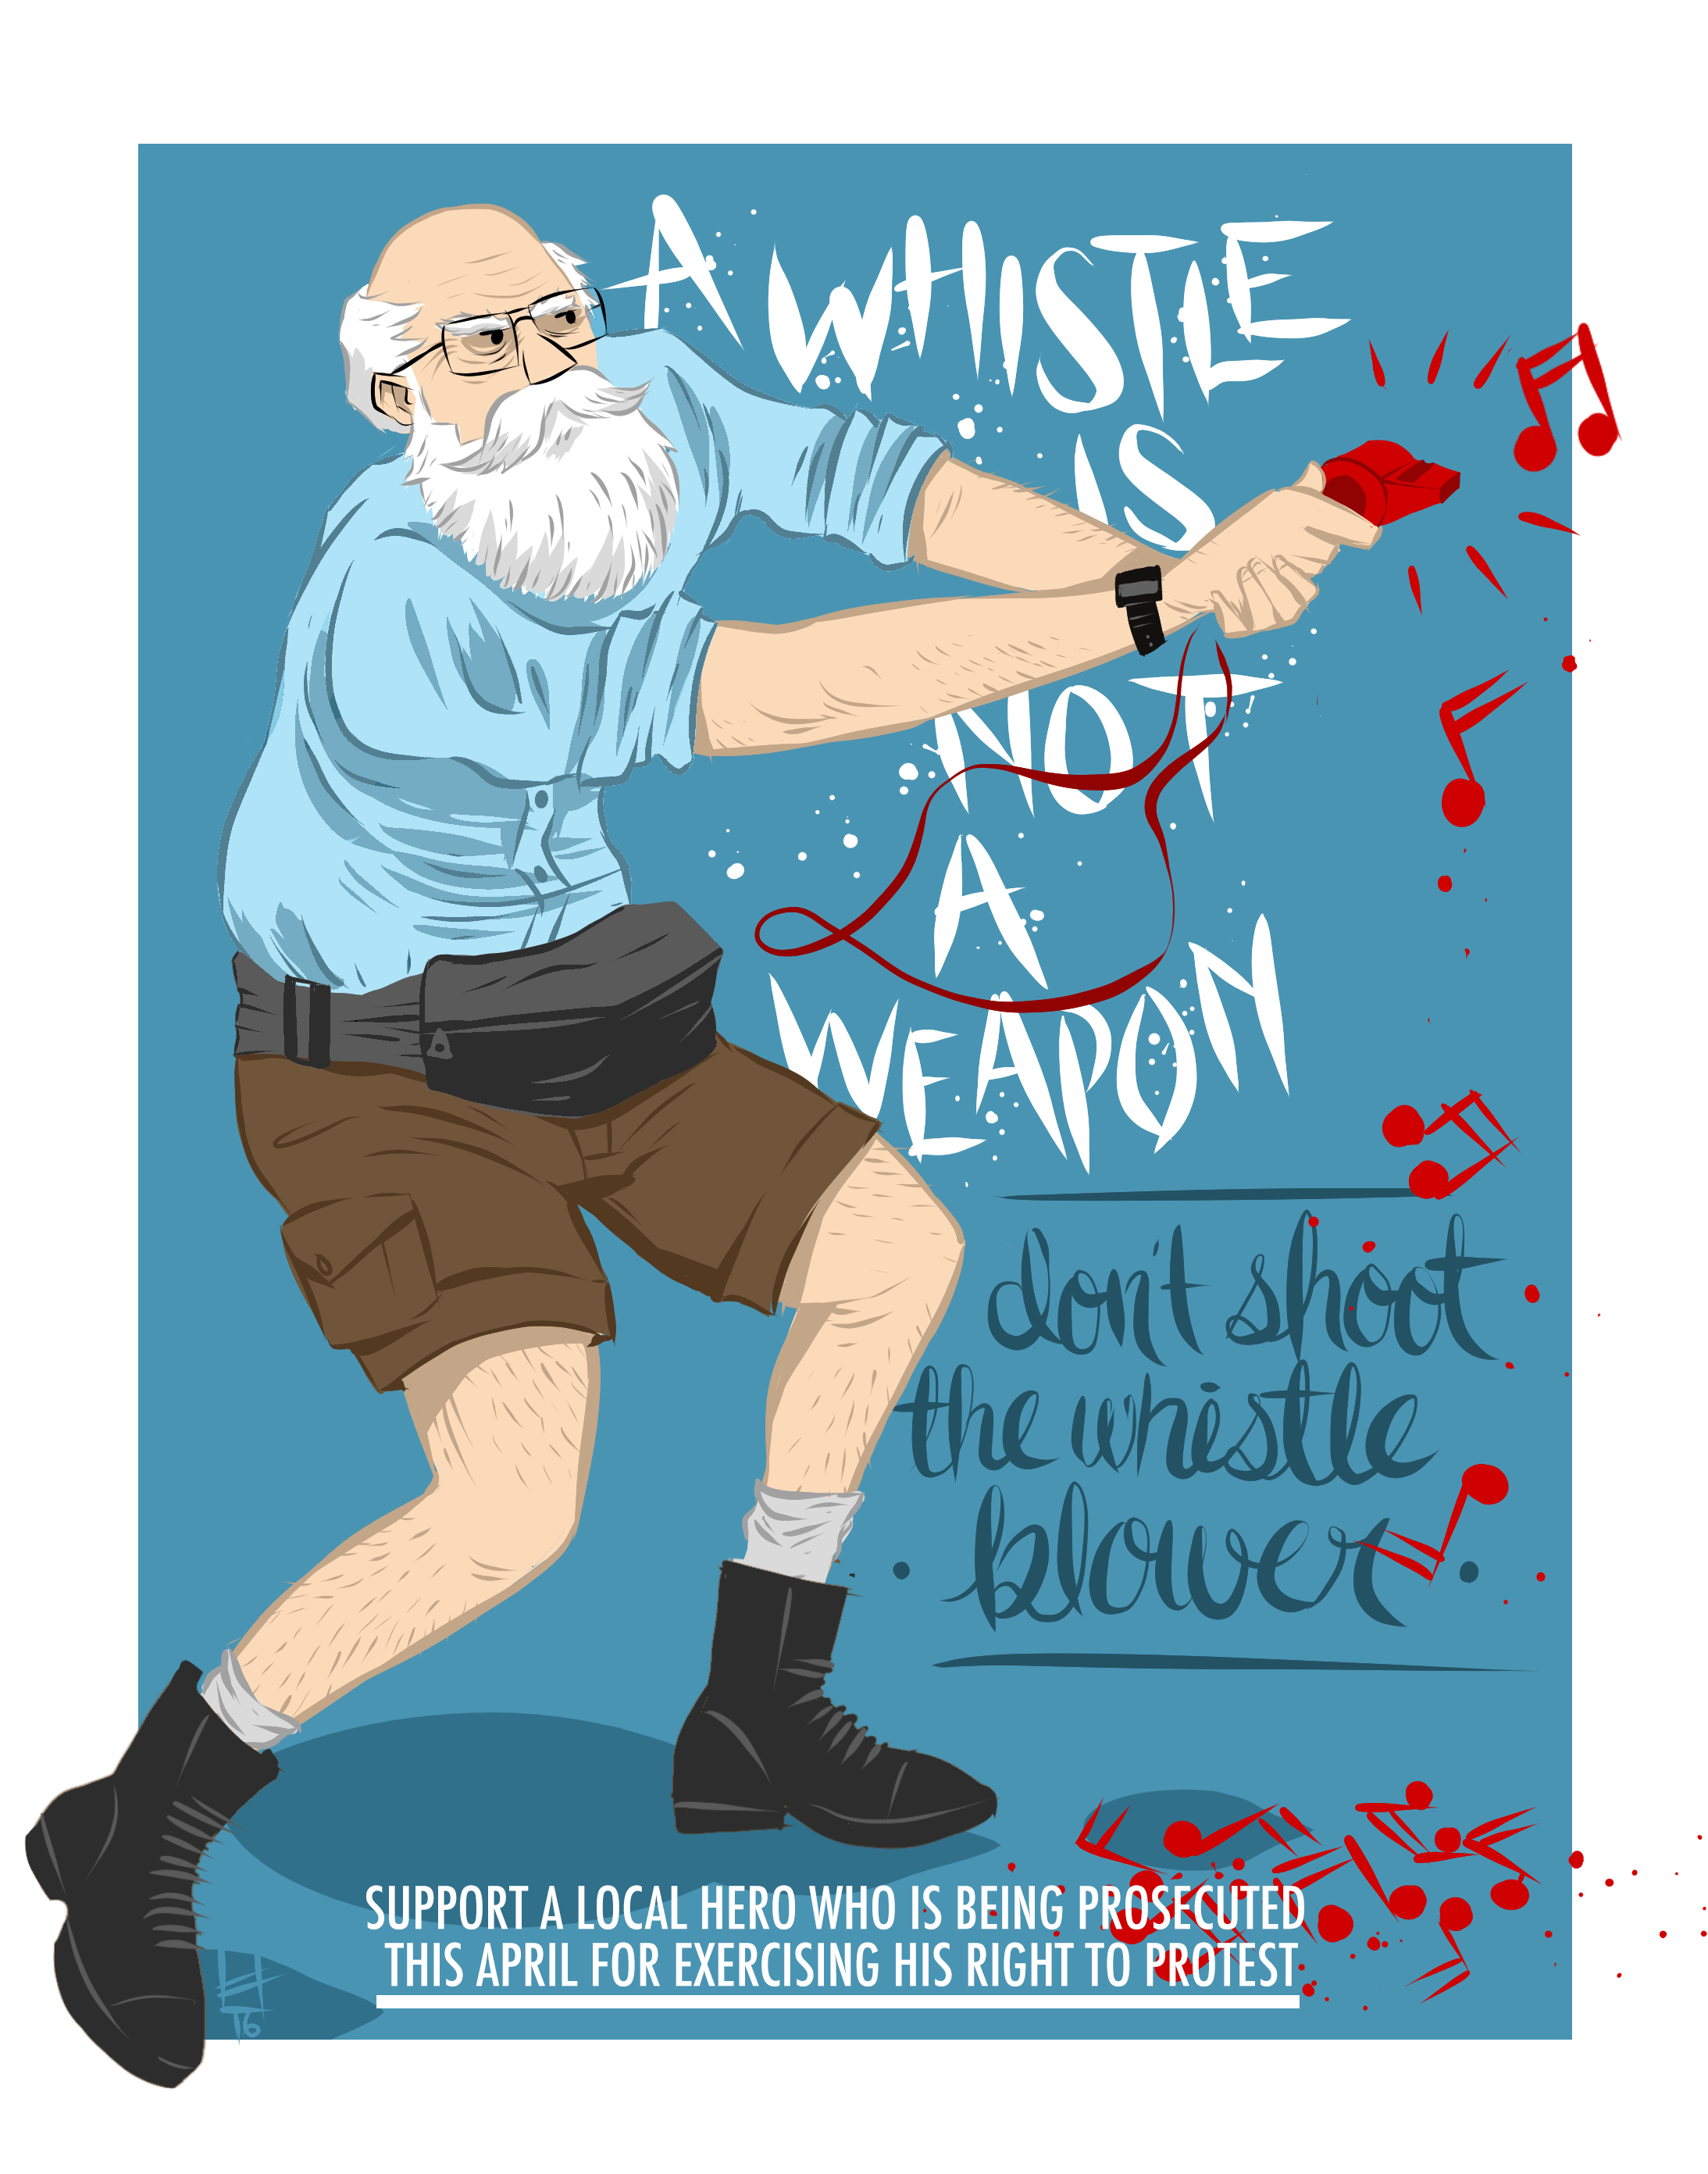 Whistle not weapon_writing.jpg